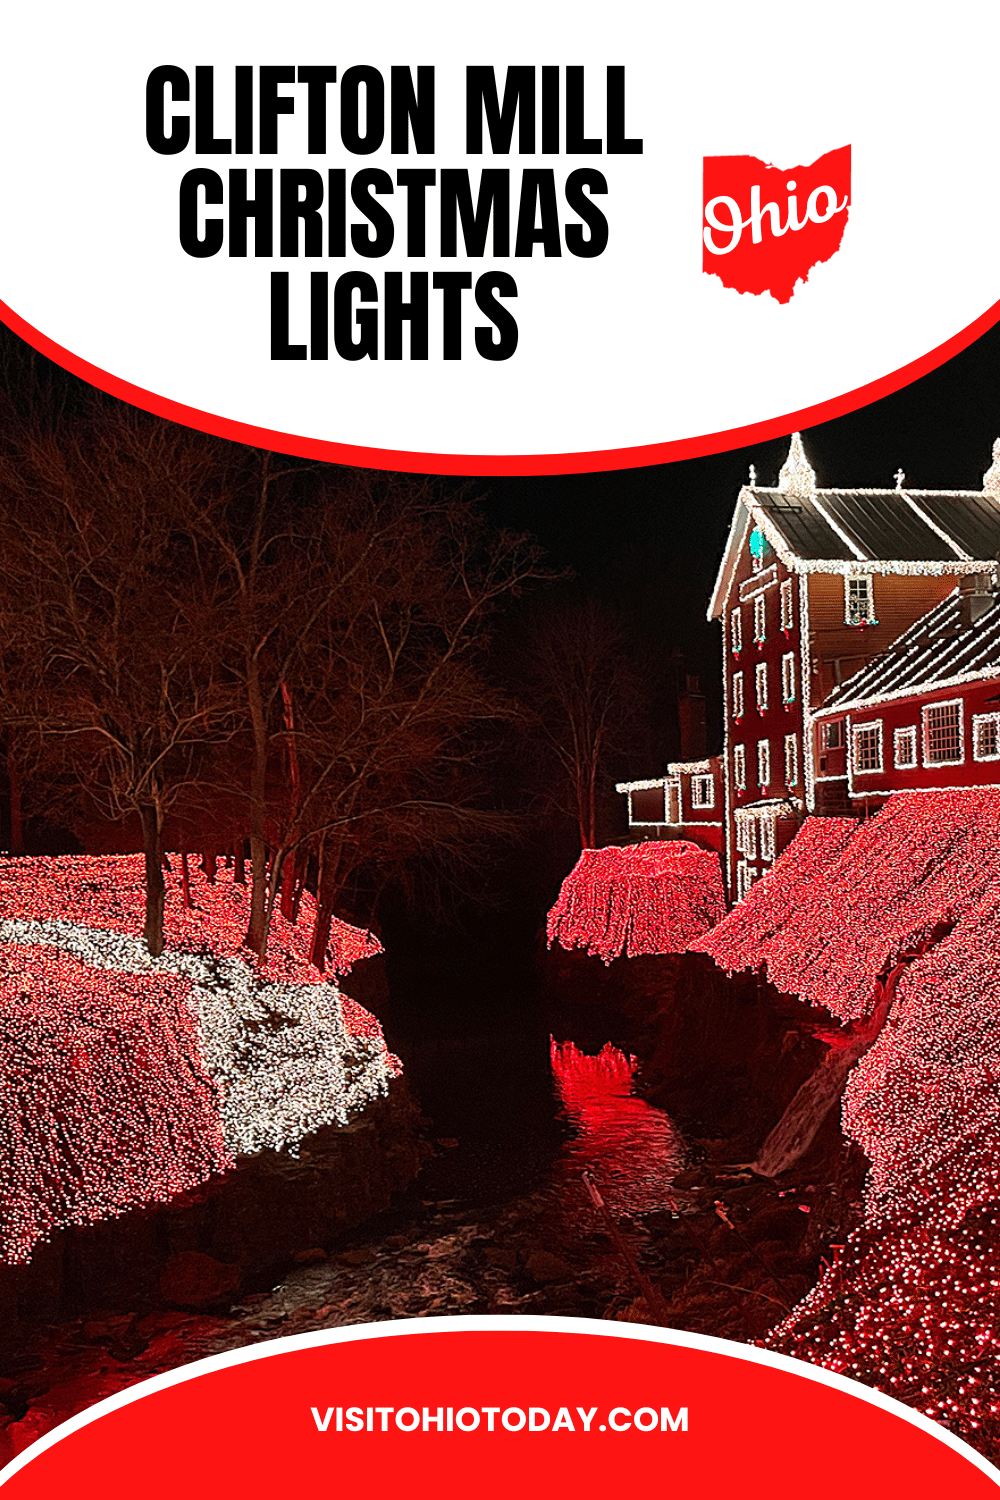 Clifton Mill Christmas Lights are a sight like nothing you have seen before. Millions of lights illuminate historic Clifton Mill to create the most perfect Ohio Christmas lights display. Save this pin for later!